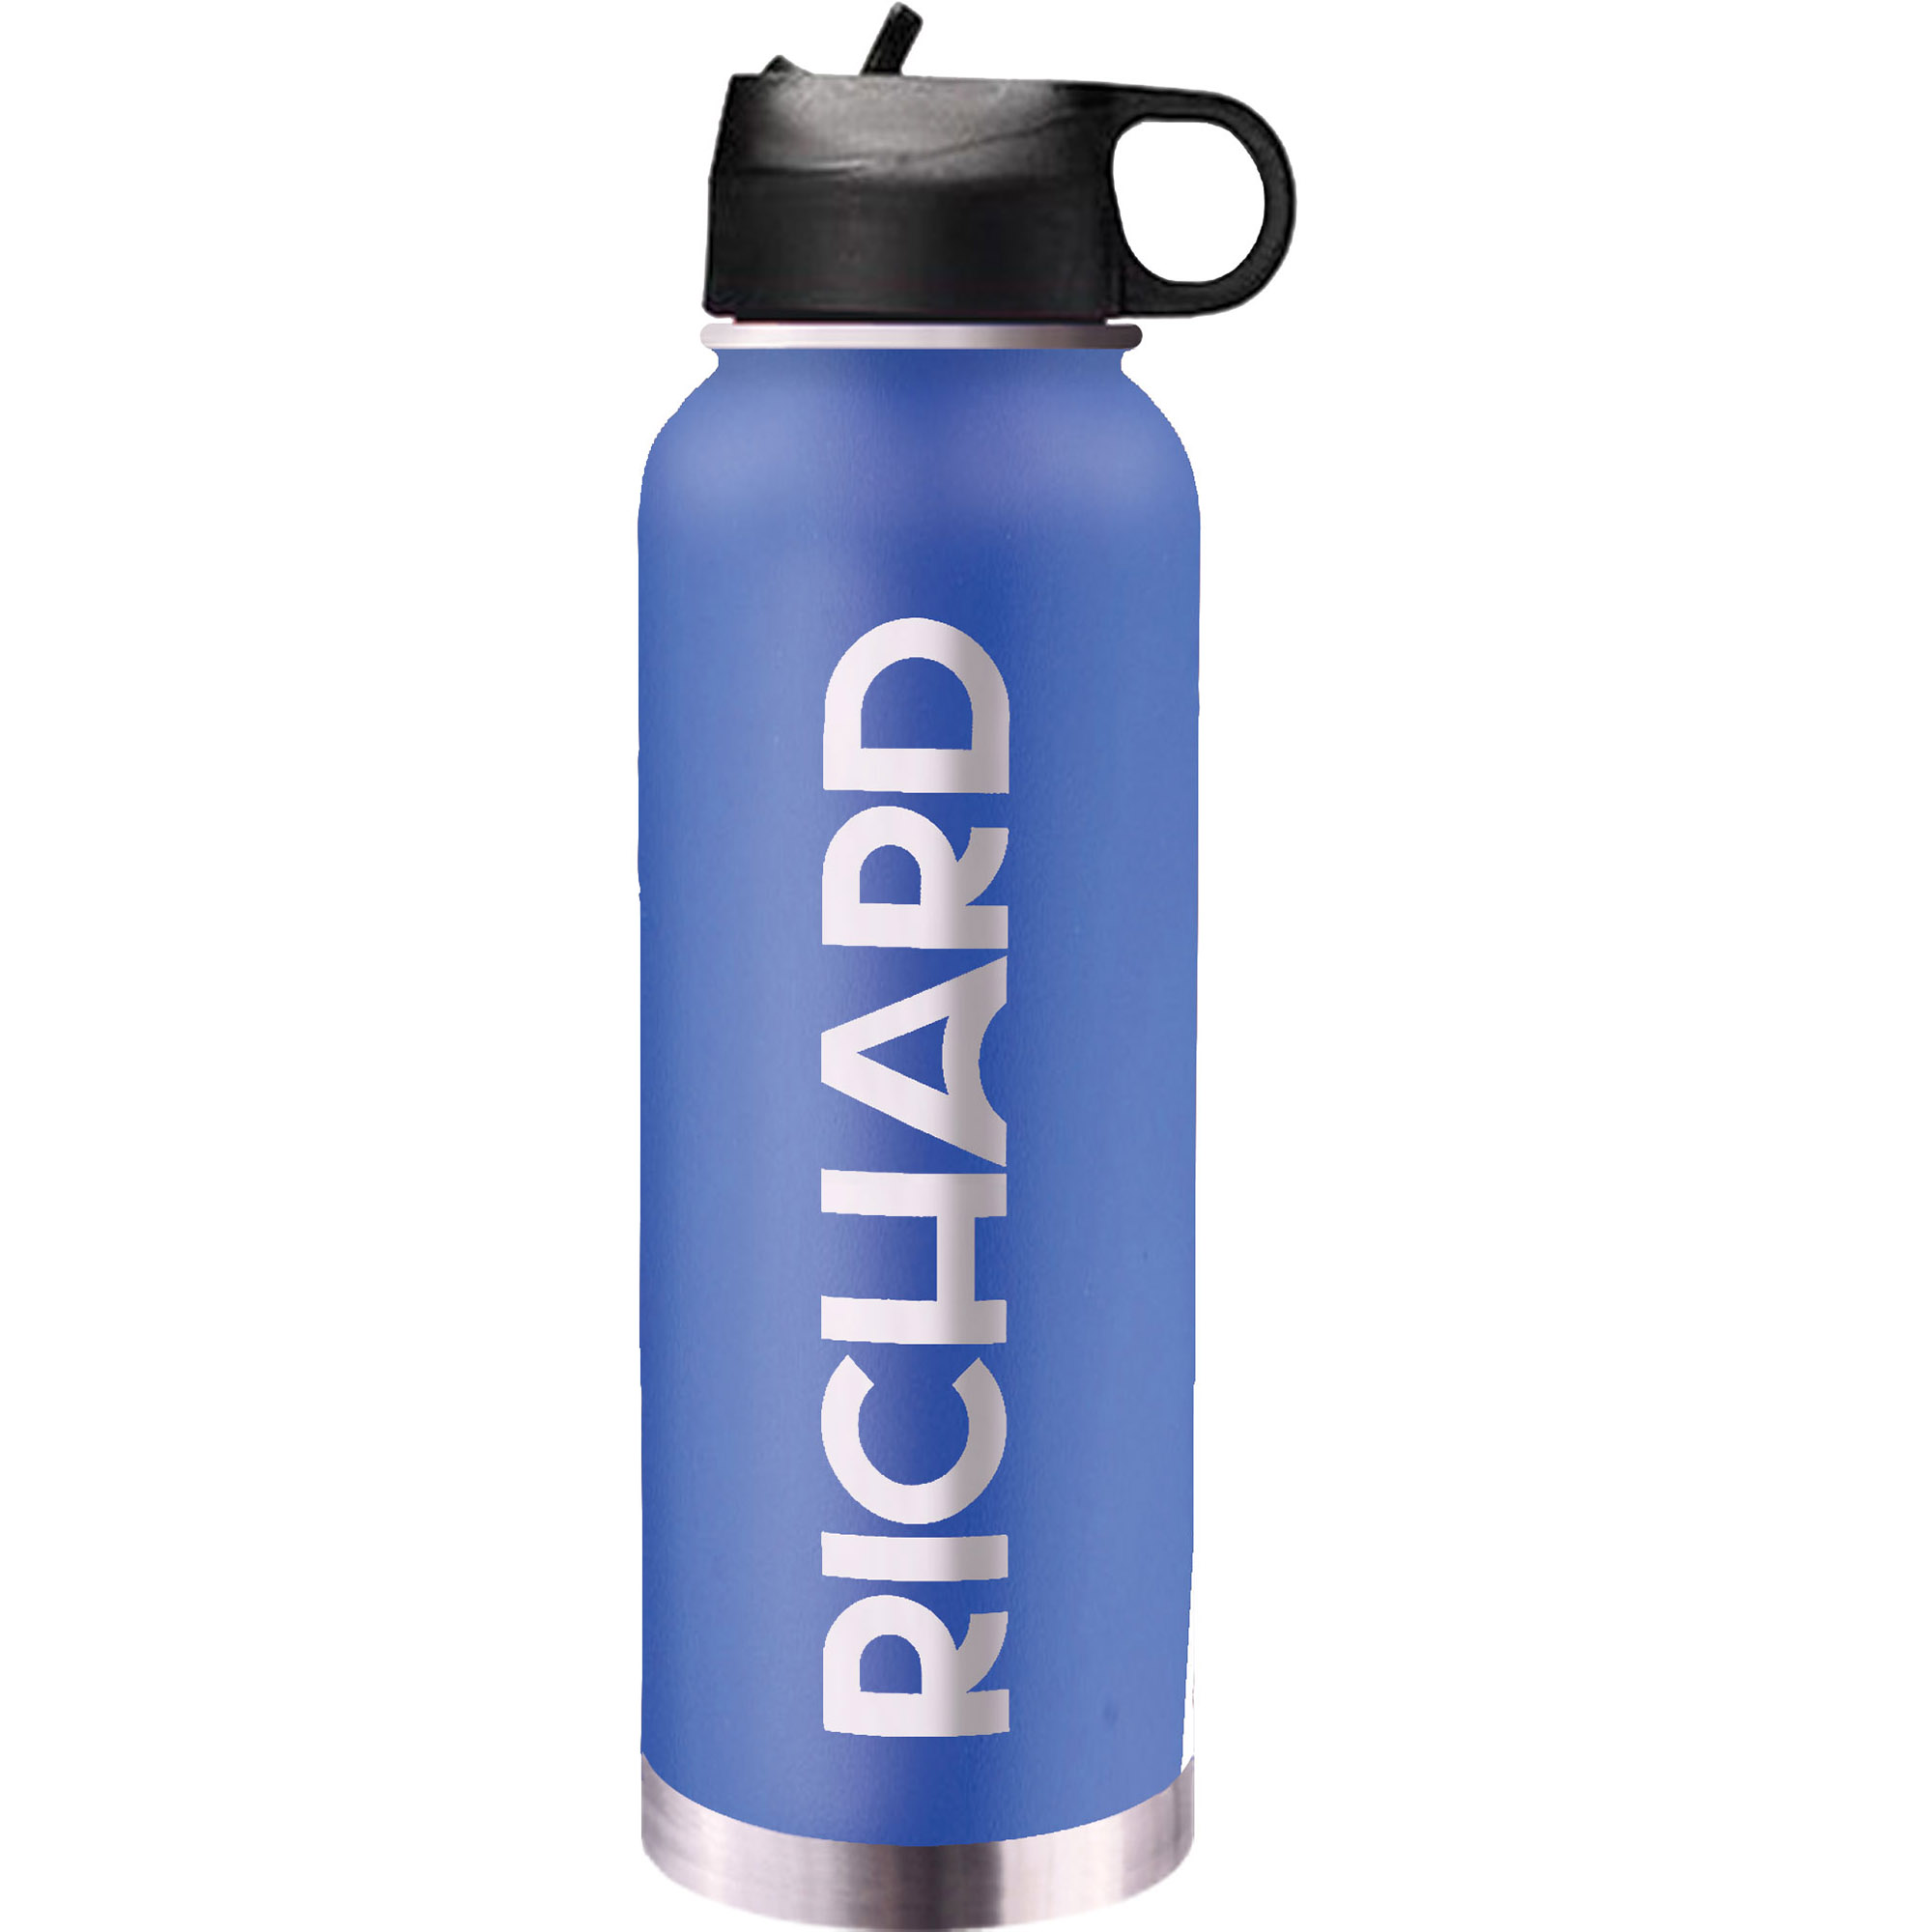 https://images.trophydepot.com/QC/images/products/Tahoe-32-oz-Waterbottle-TMLG17-RBLU.jpg